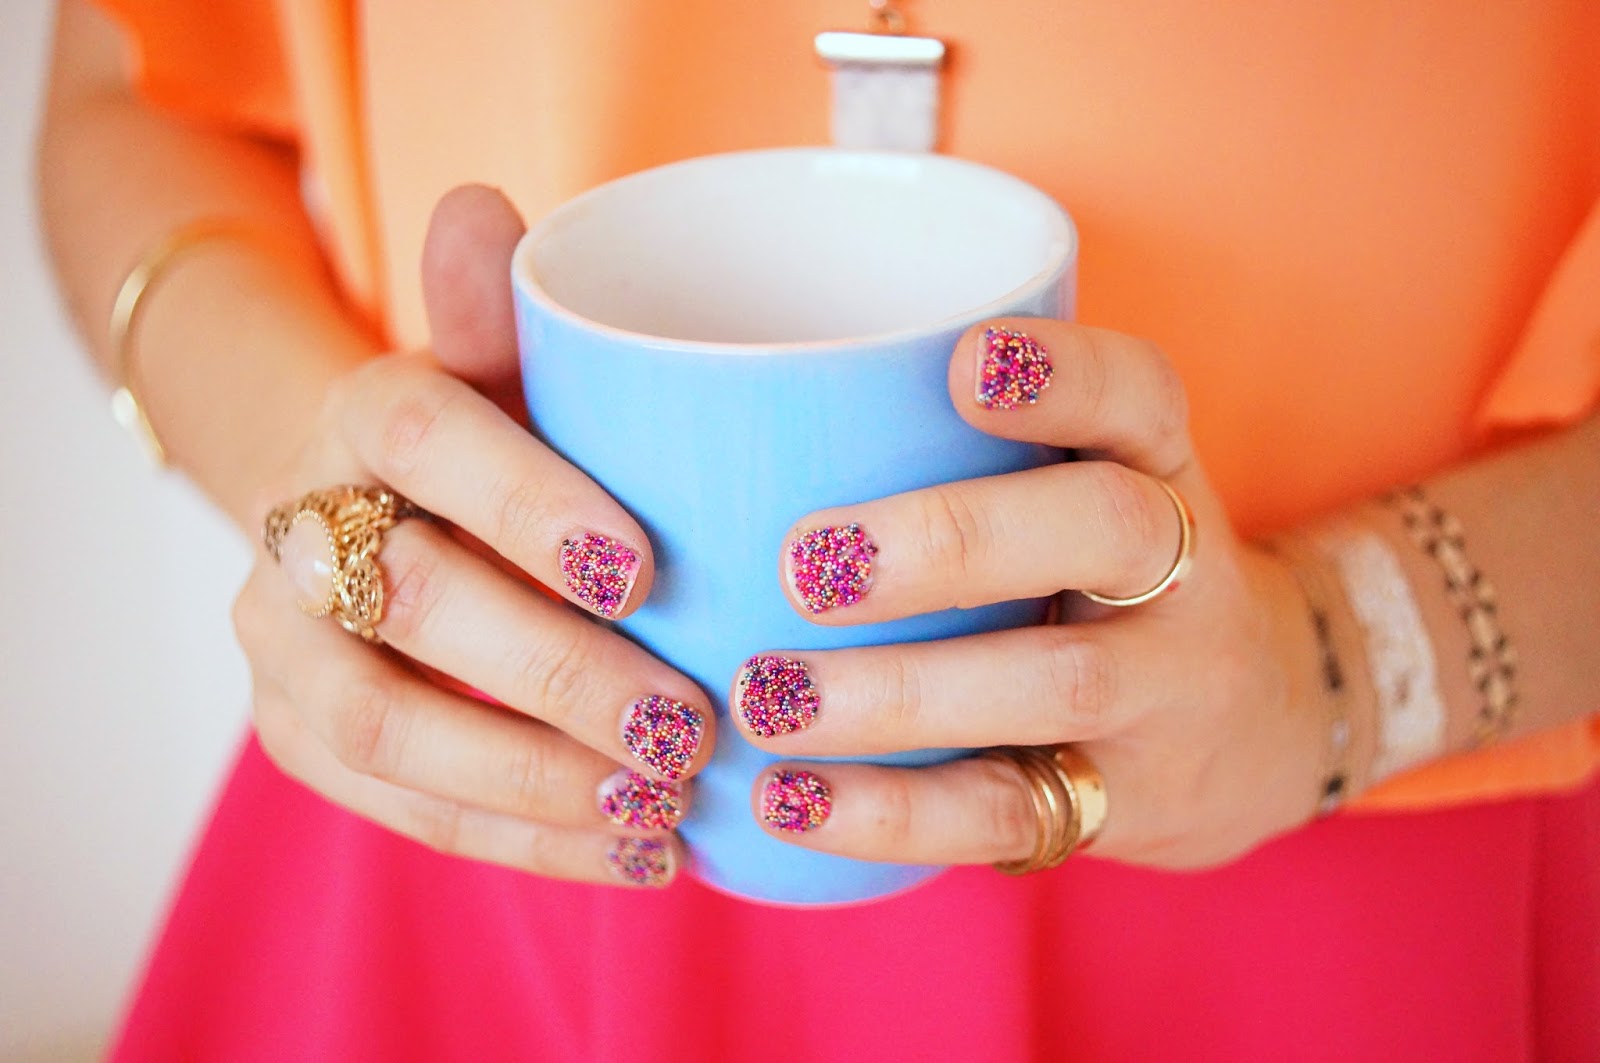 These Sprinkles nails are so cute!